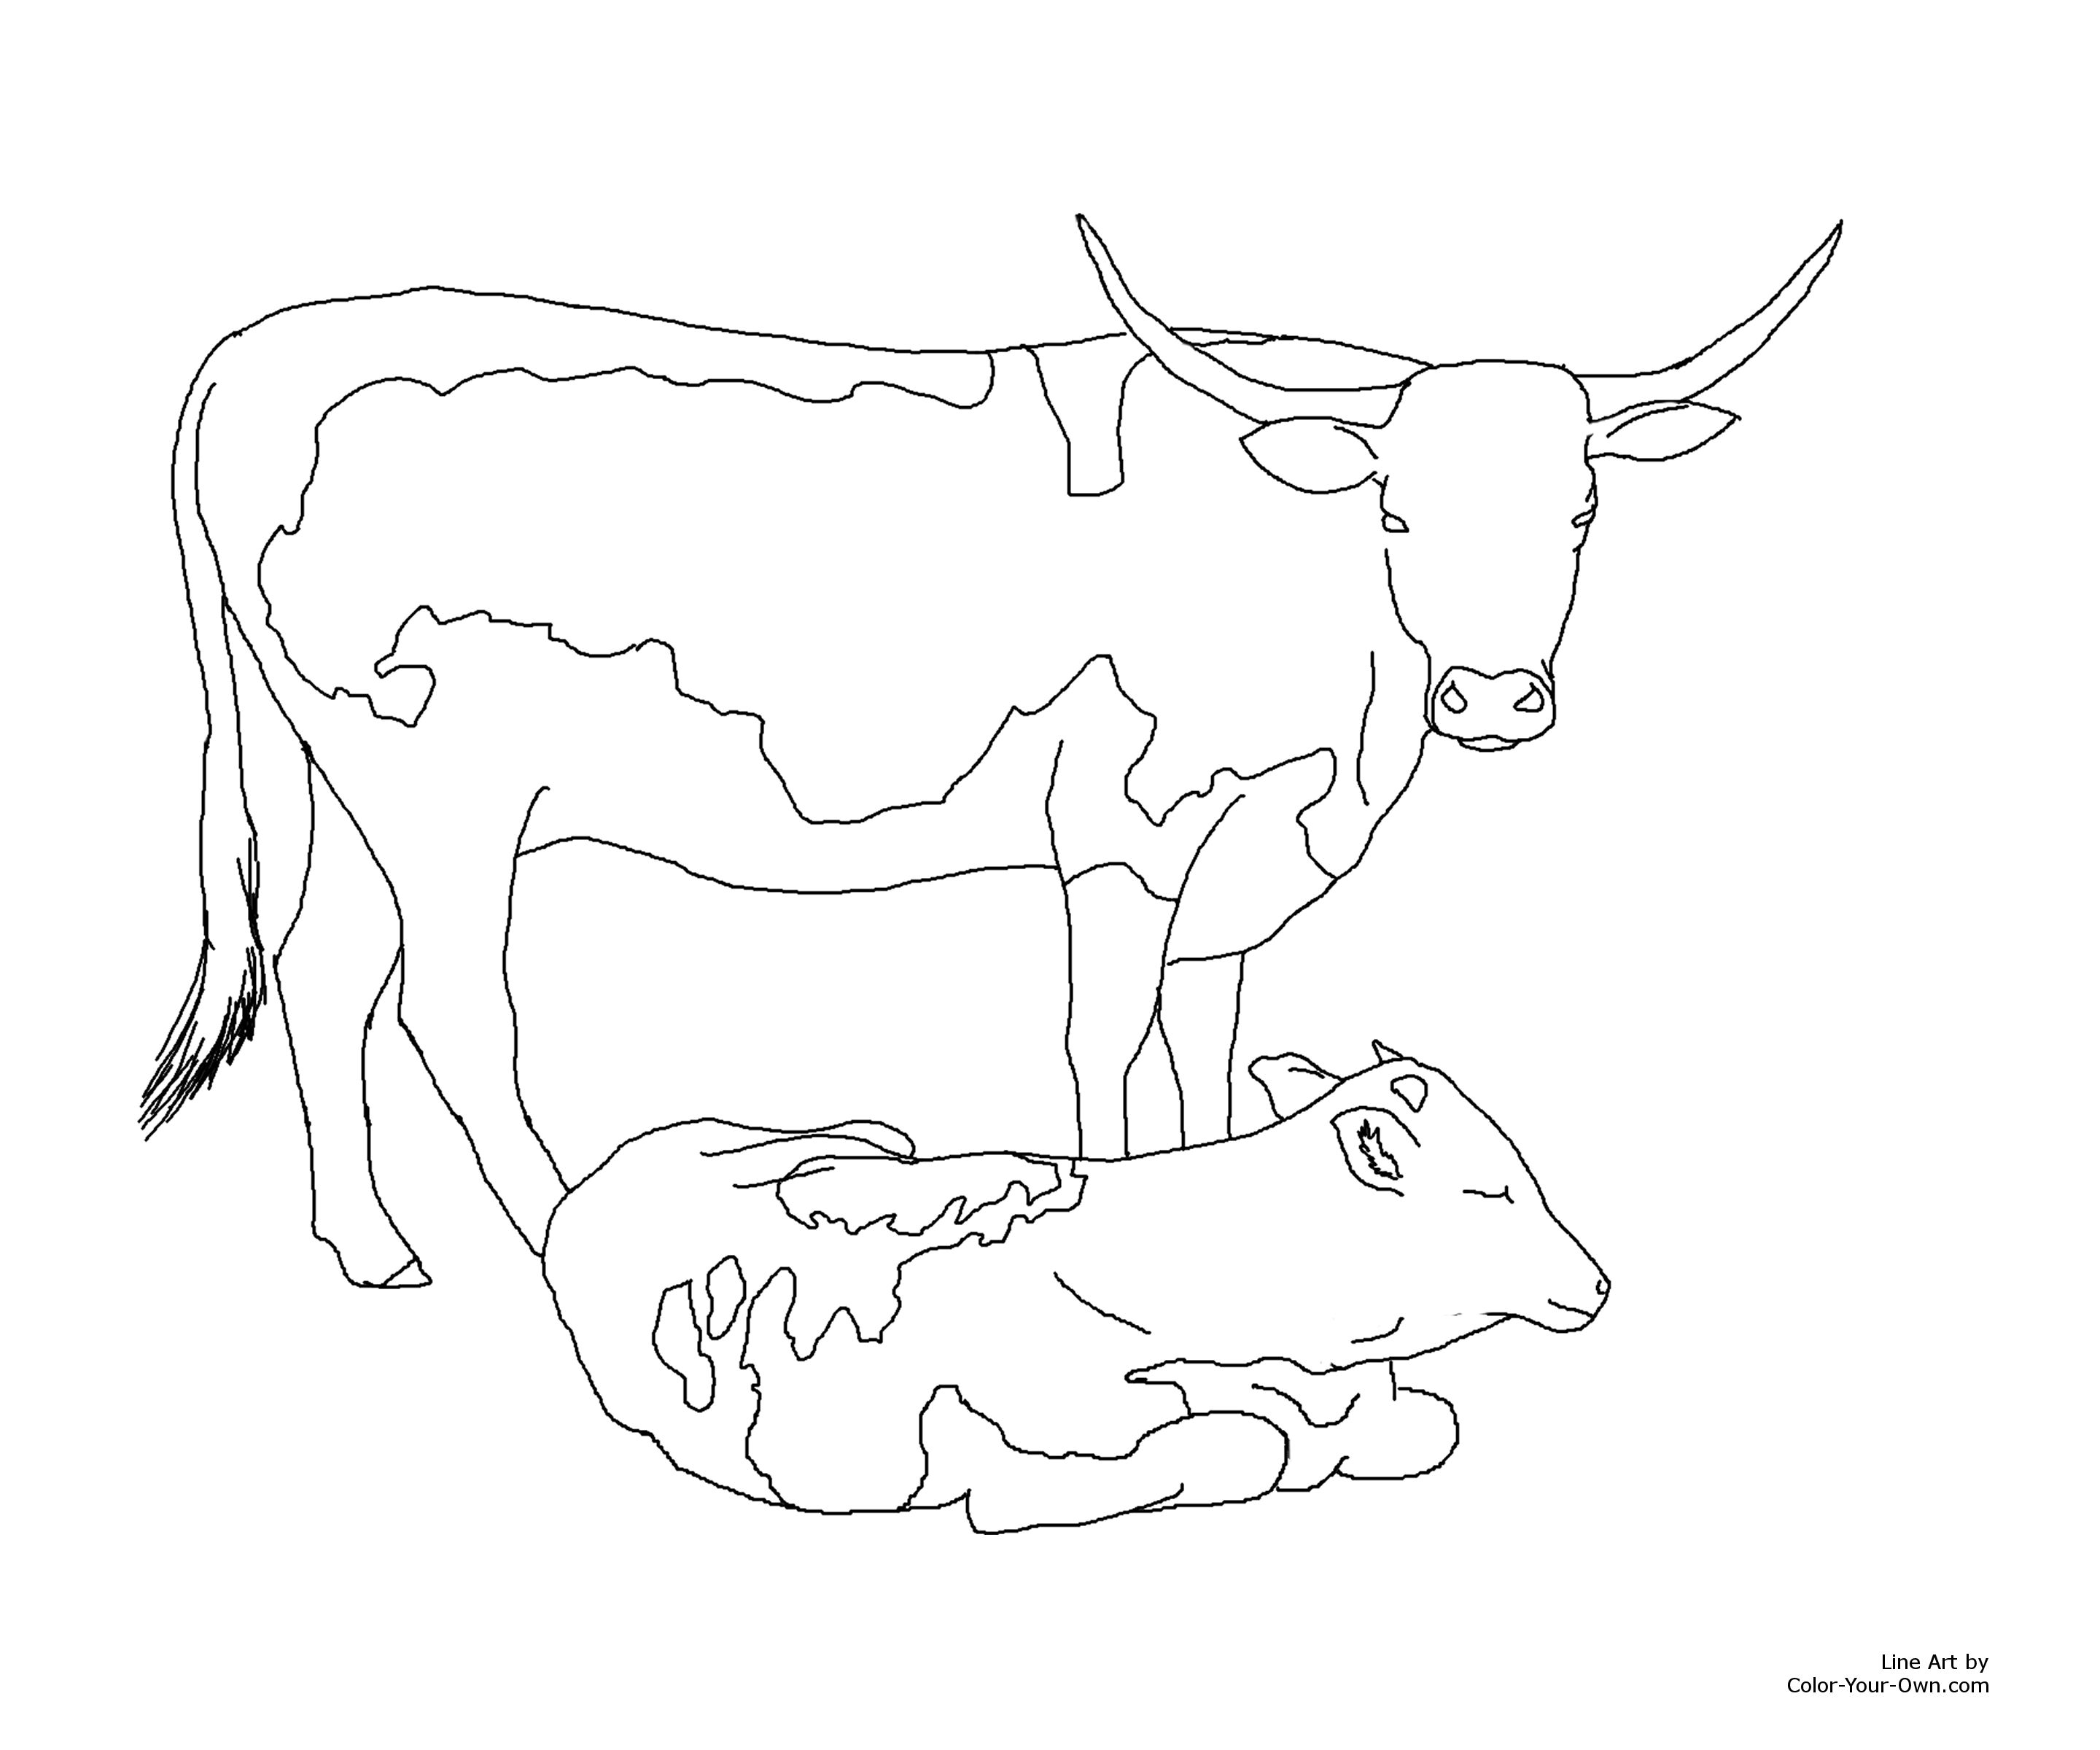 Longhorn Cow and Calf Coloring Page